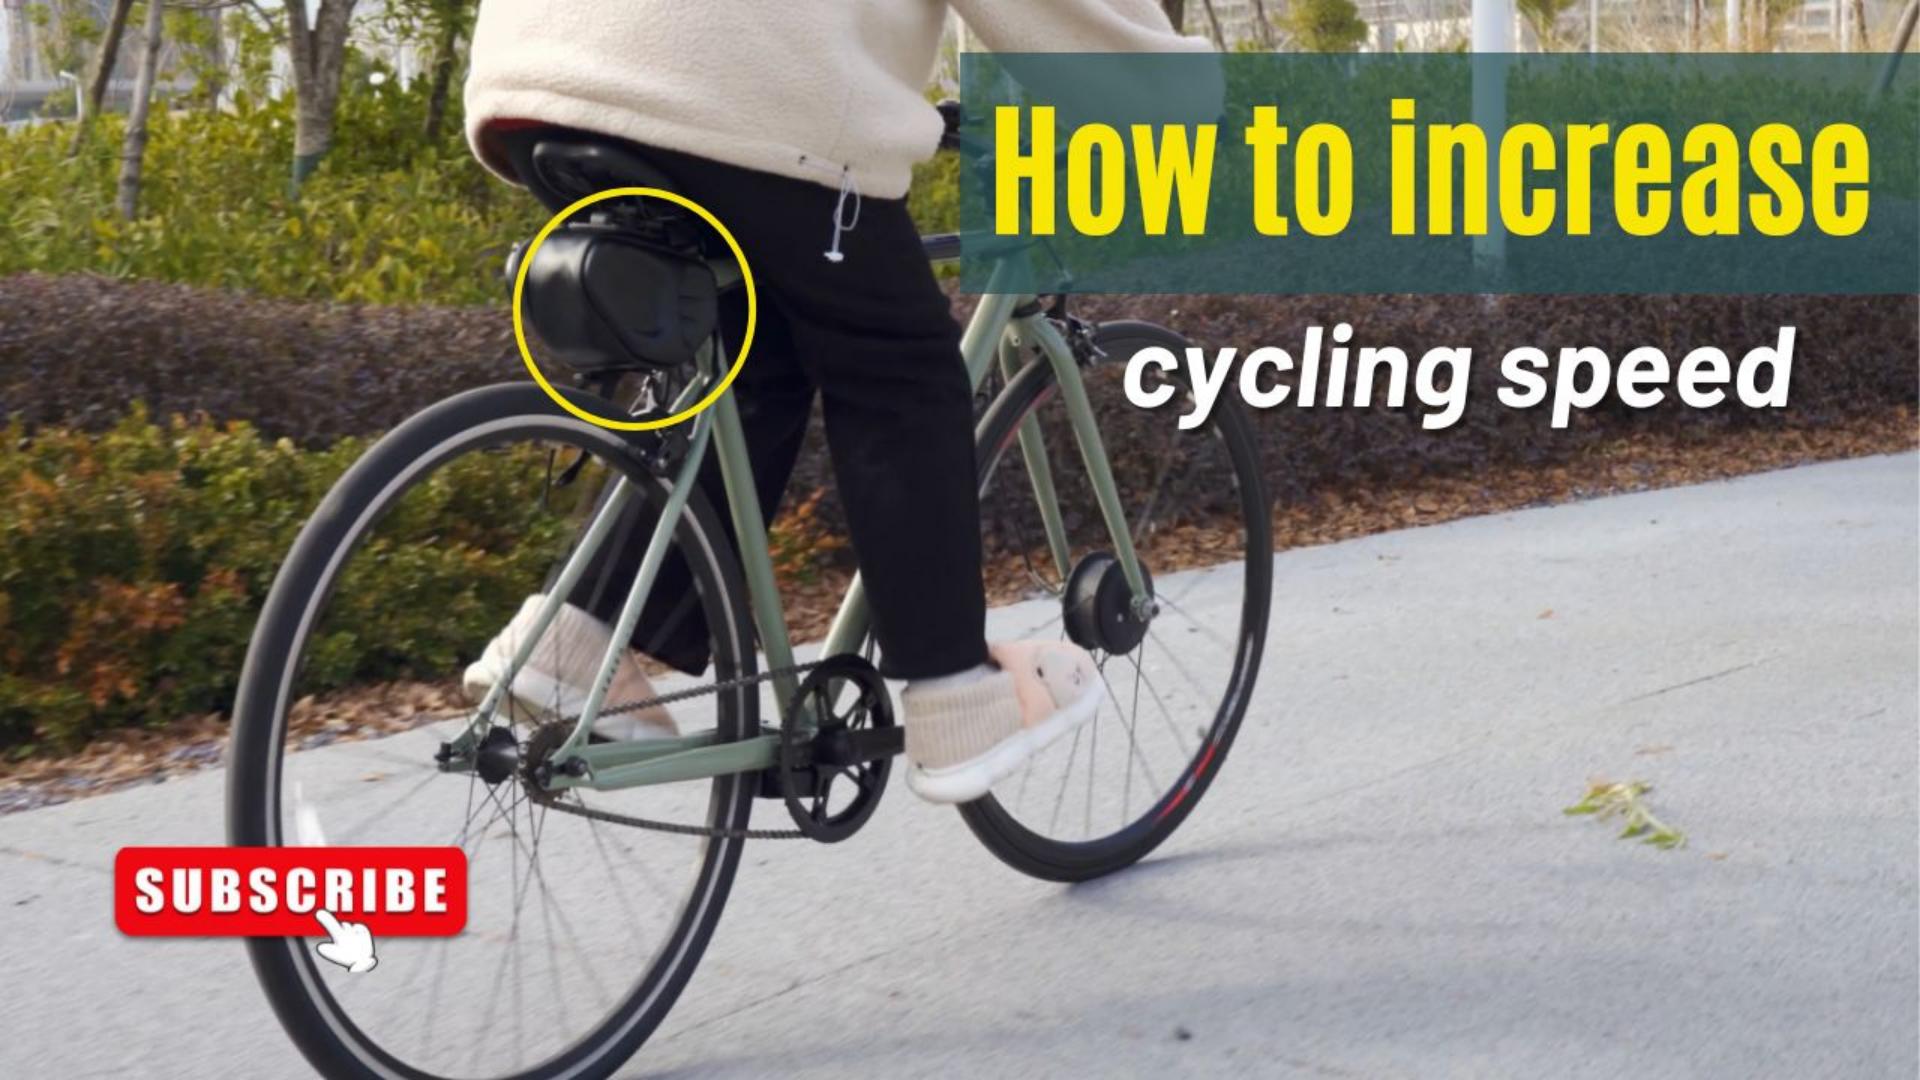 How to increase cycling speed without changing your bike?